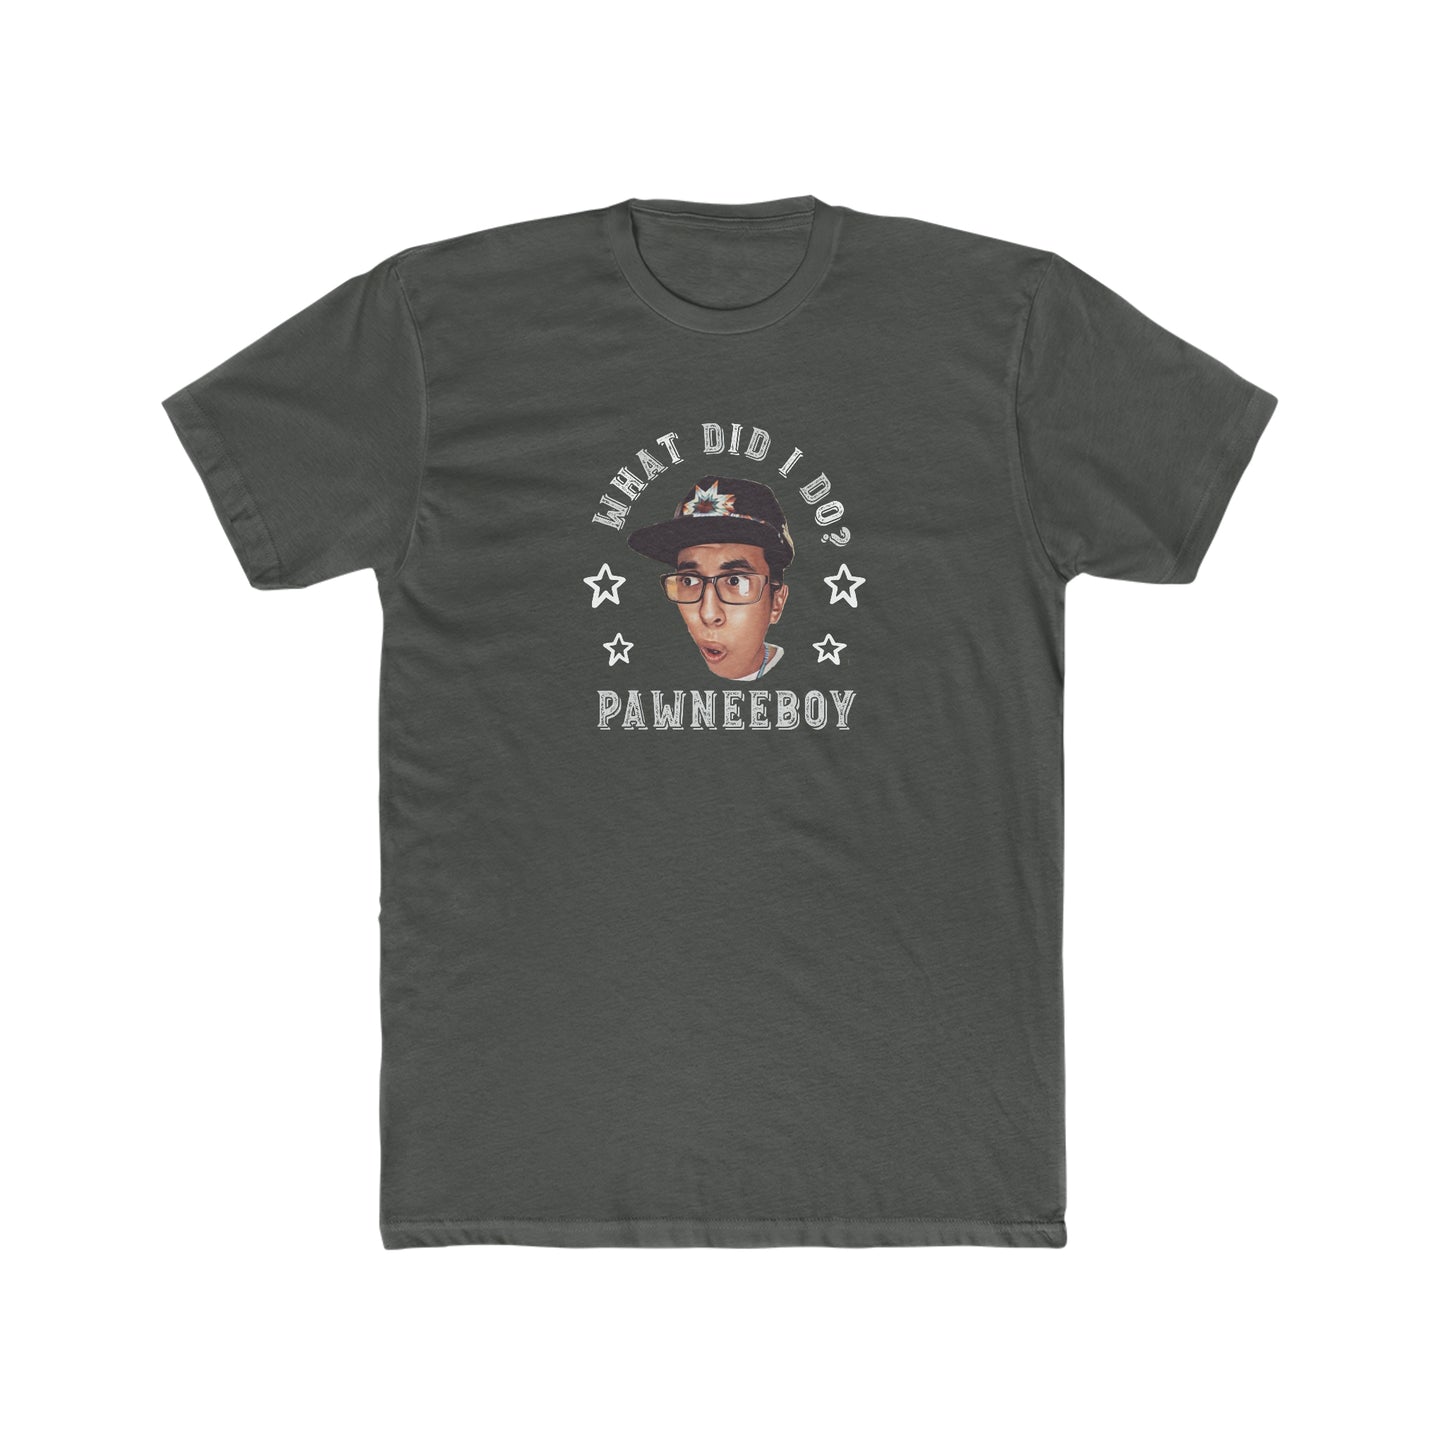 Pawneeboy  What Did I Do? Shirt Native American (Special Orders)